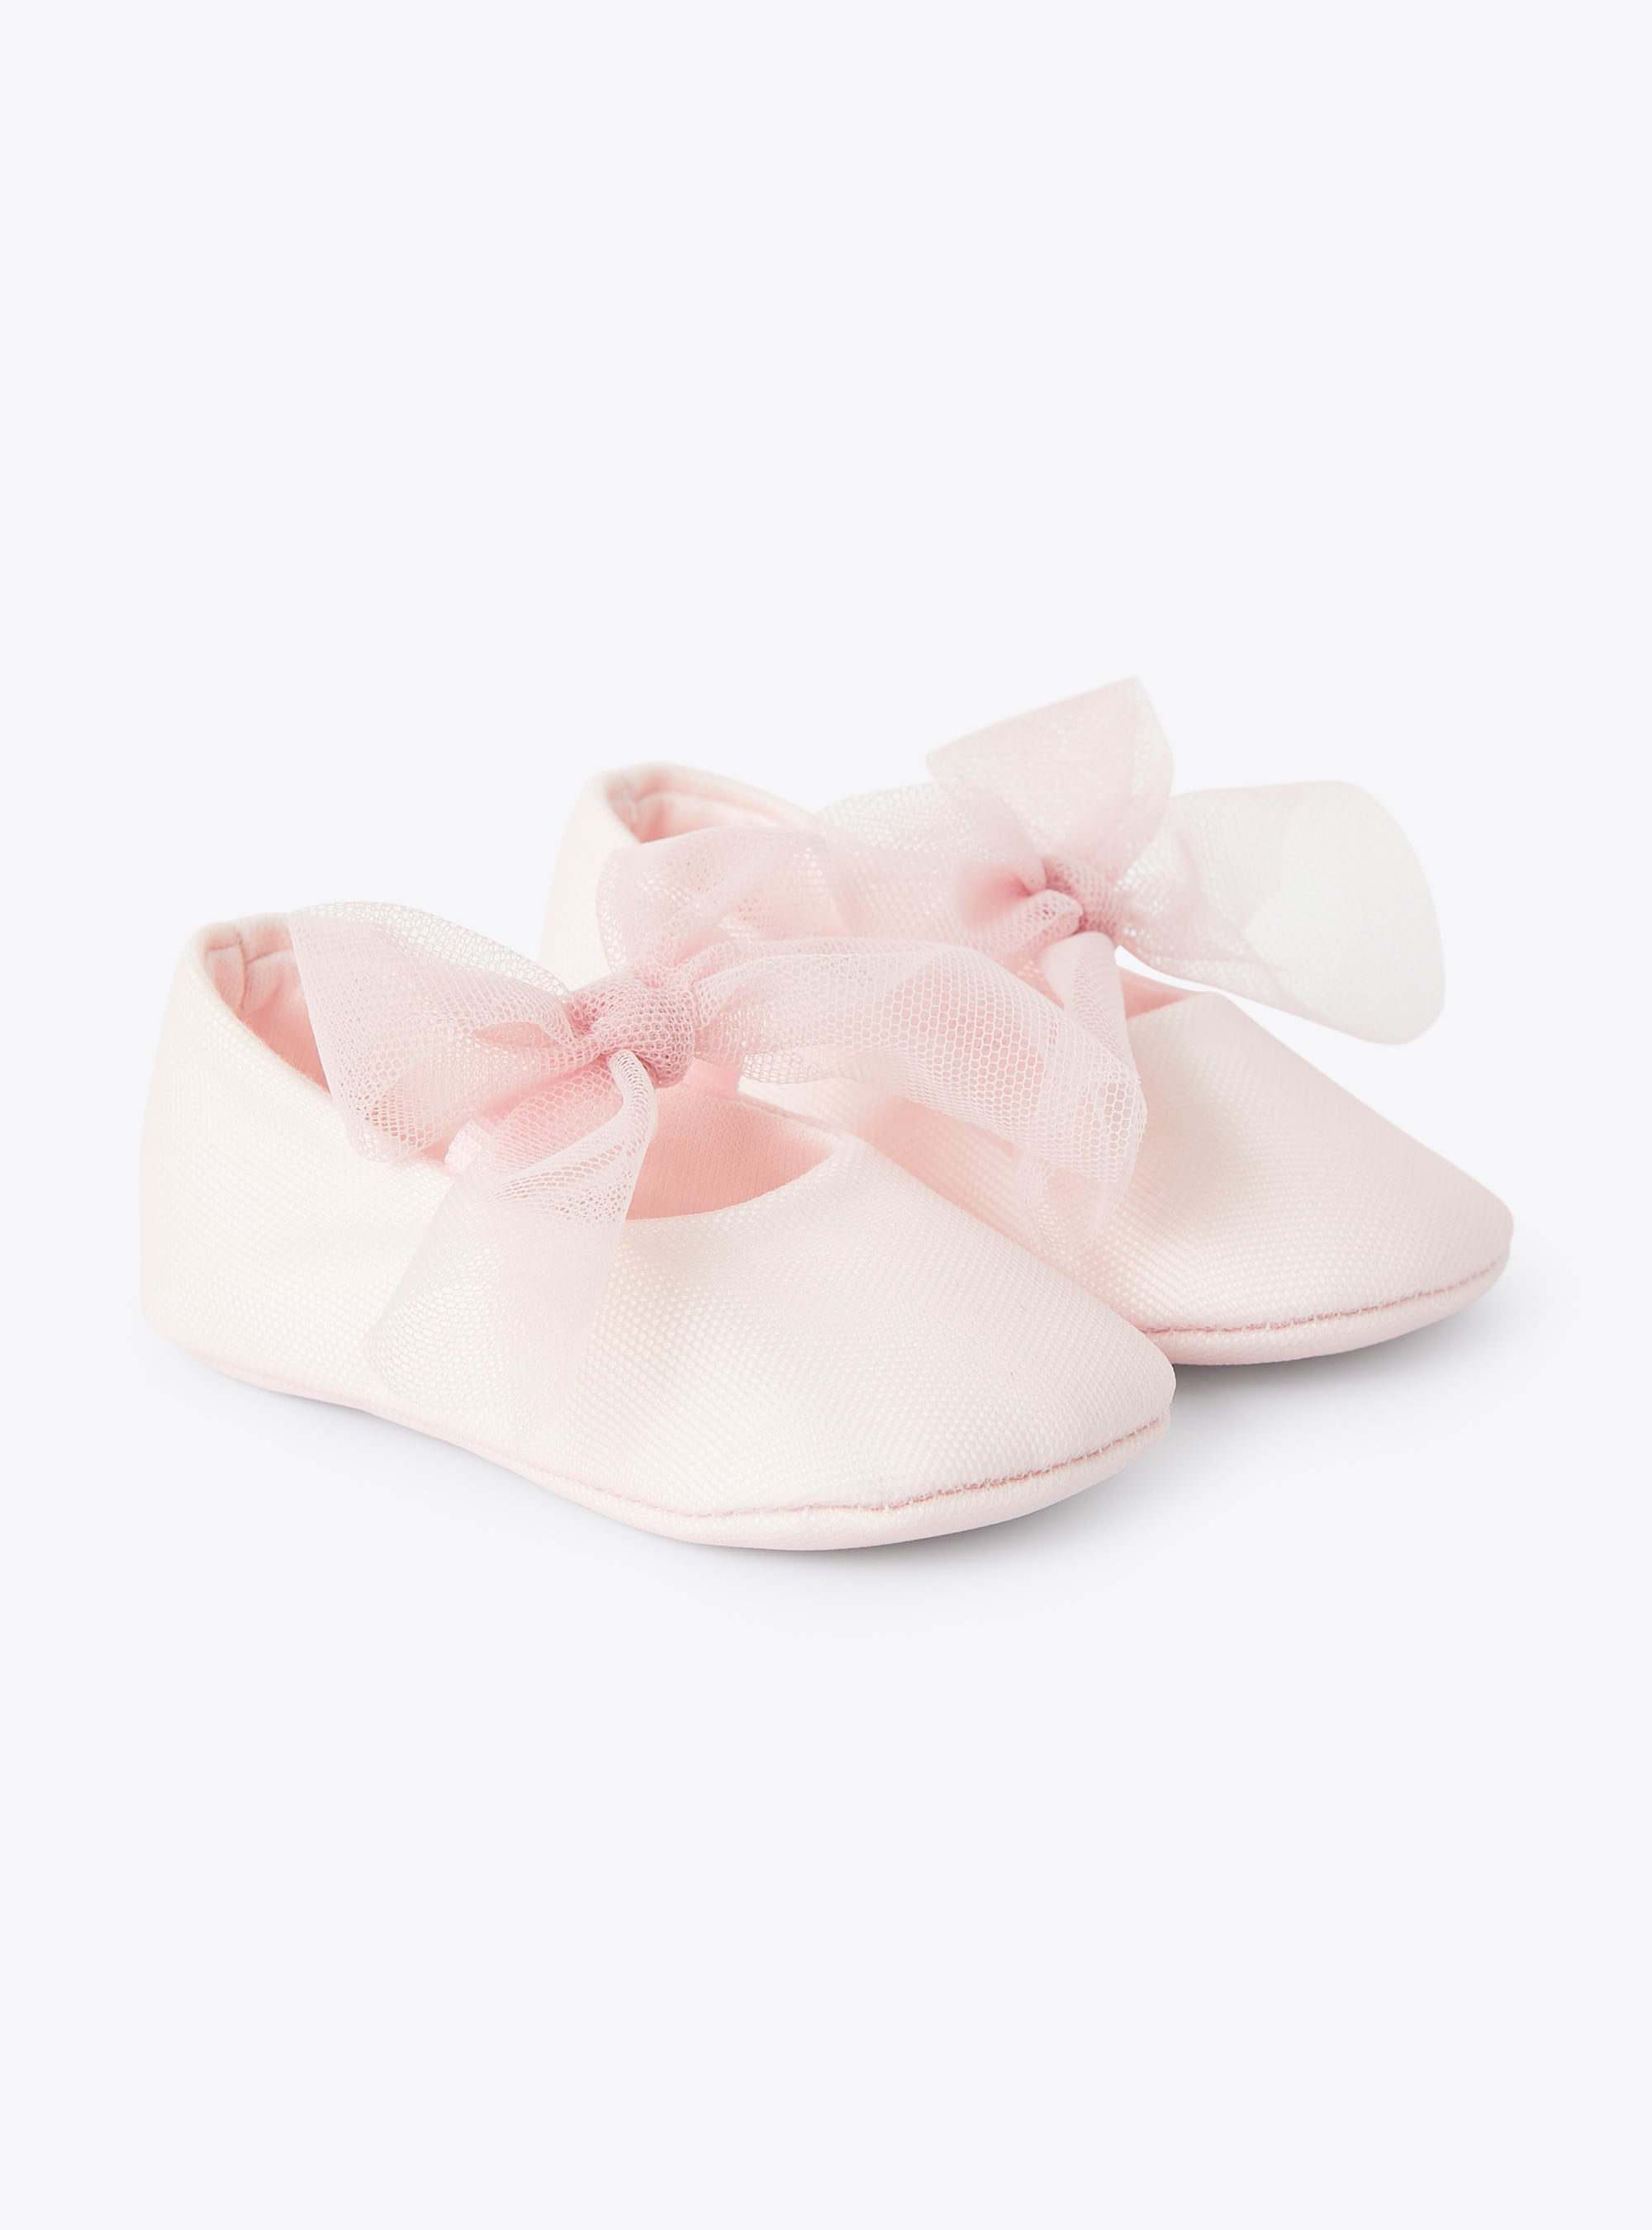 Shoe for baby girls with a pink tulle bow embellishment - Pink | Il Gufo